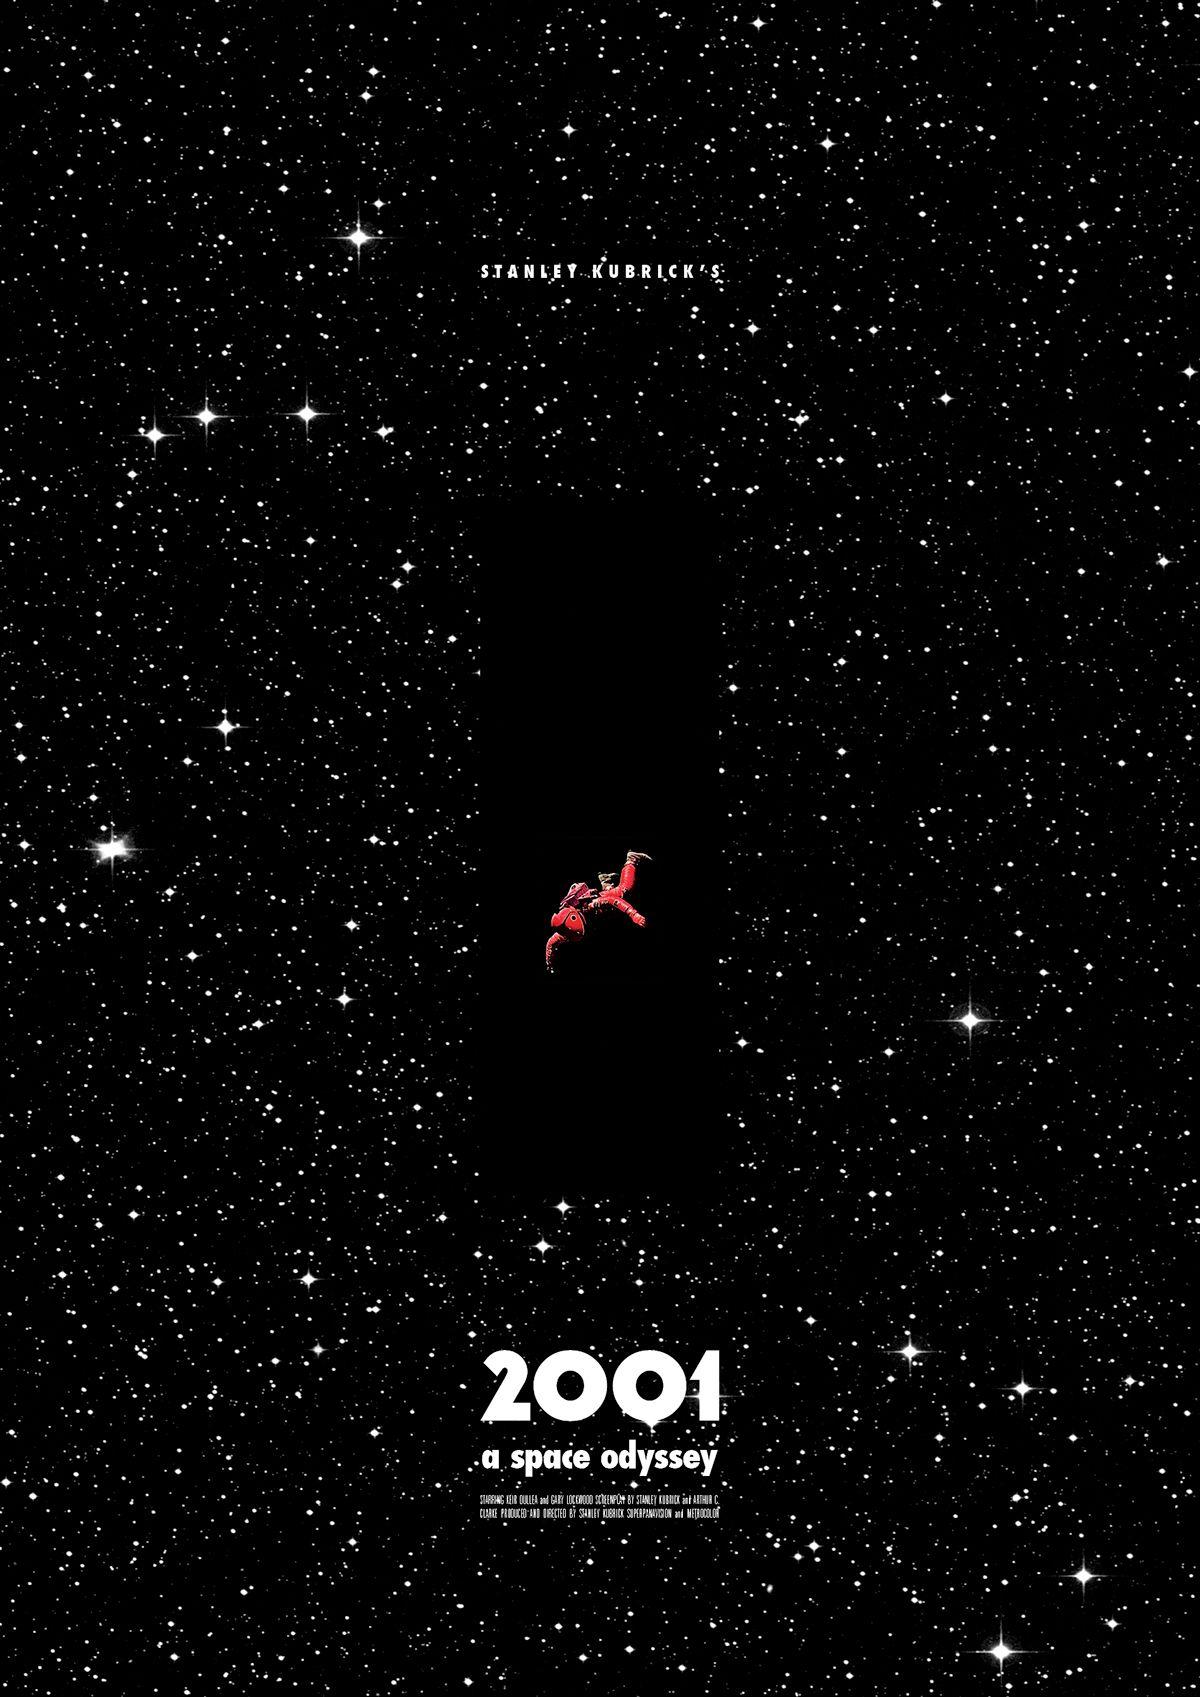 2001: A Space Odyssey (1968) HD Wallpaper From Gallsource.com